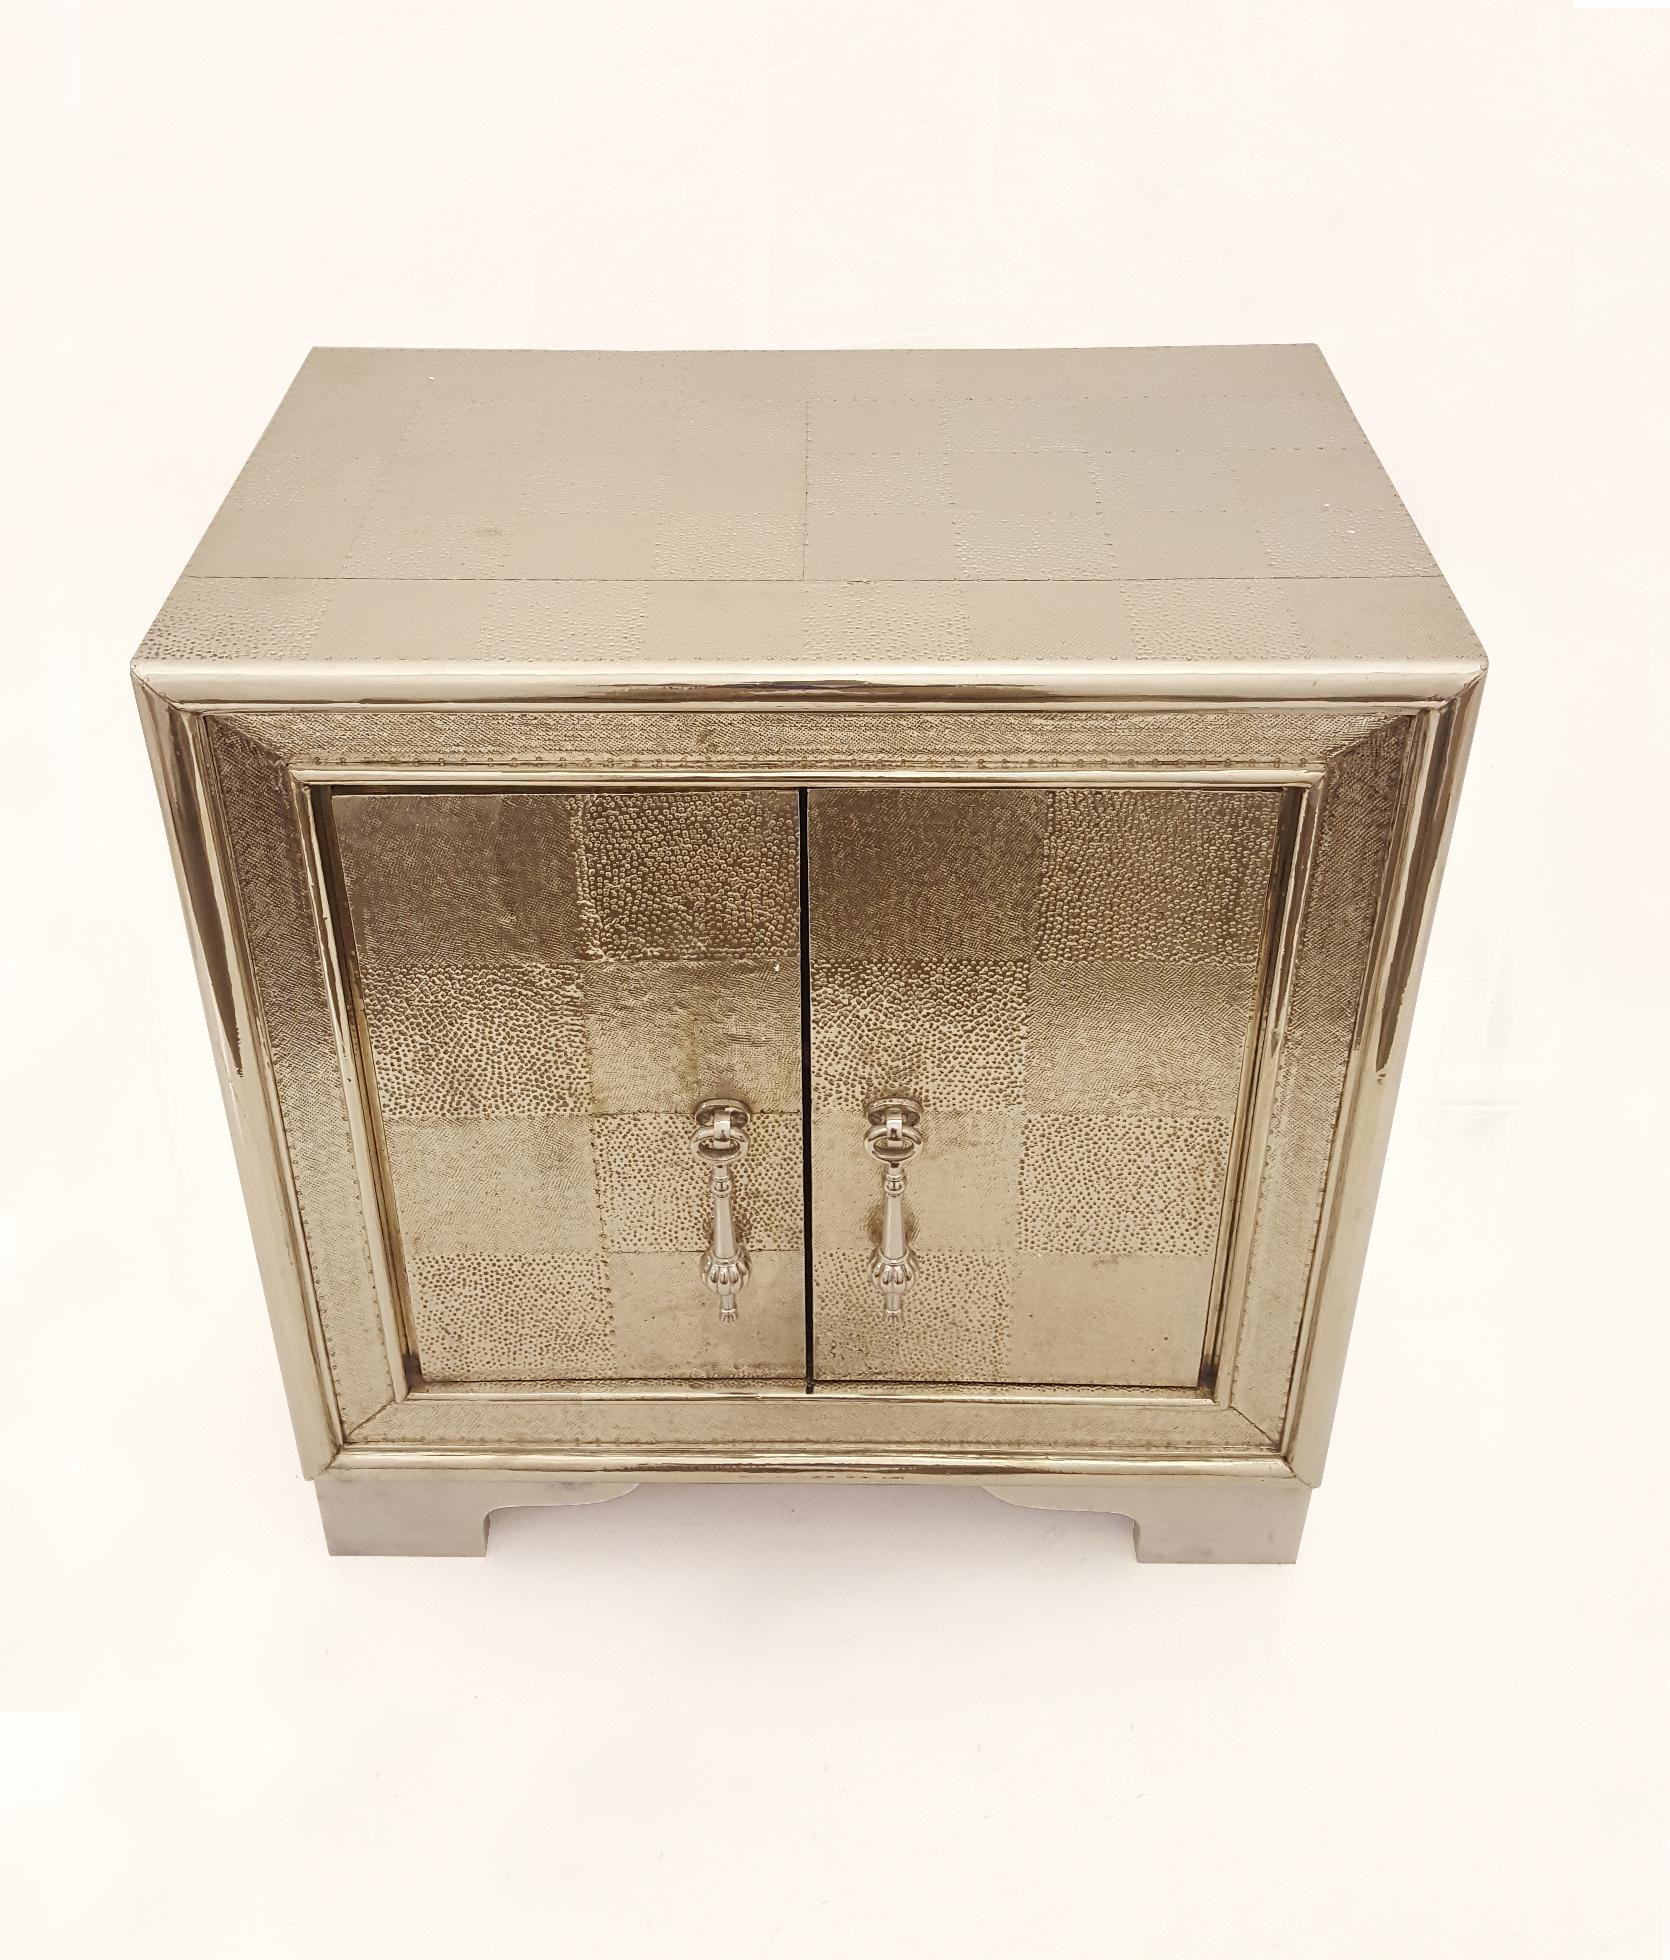 Contemporary Carre Nightstand in White Bronze Clad Over Teakwood Handcrafted in India For Sale